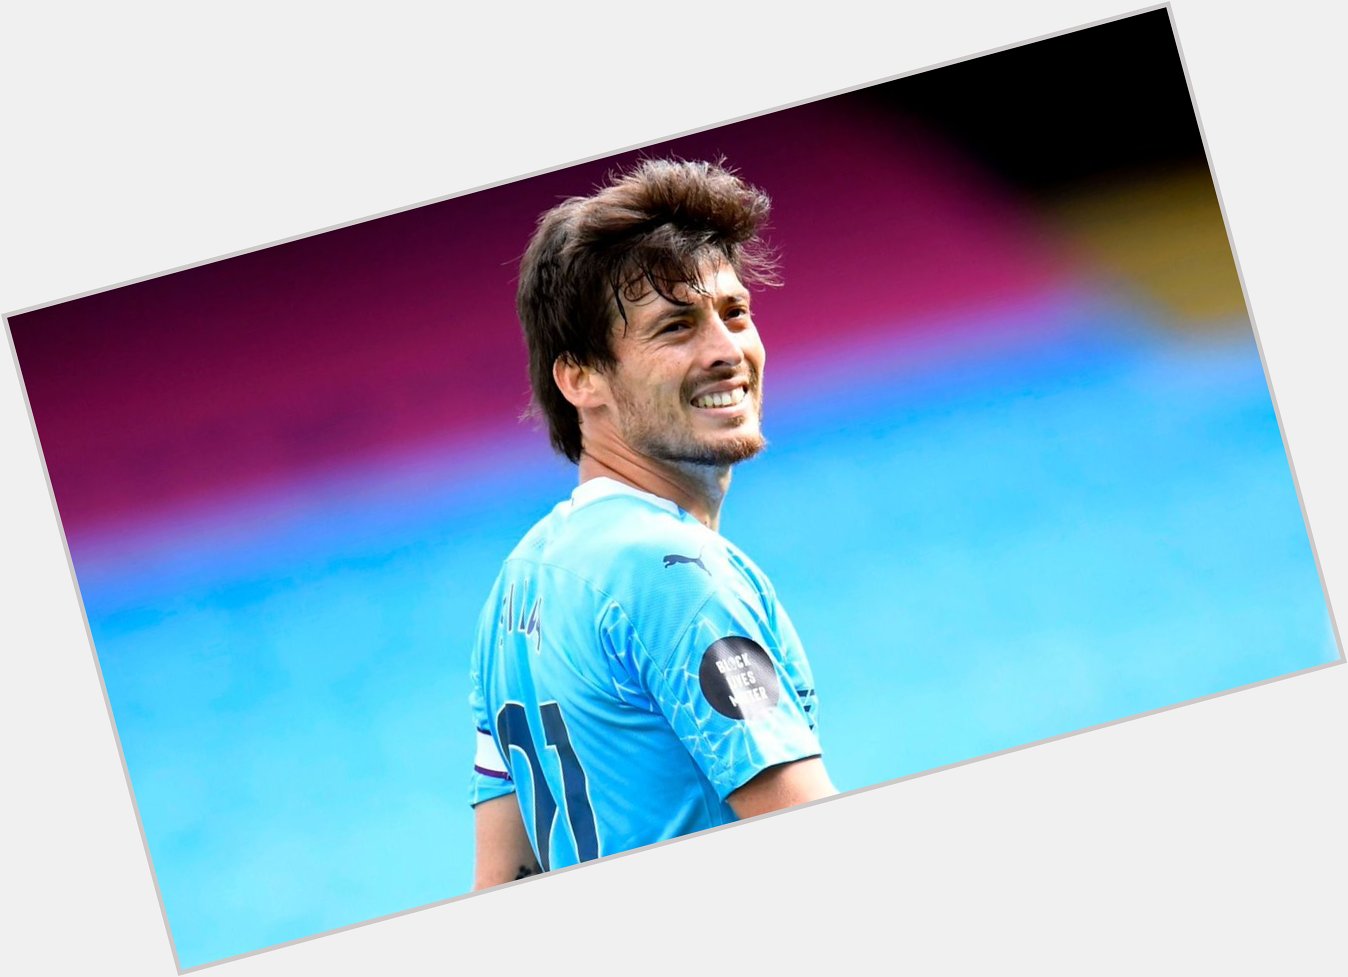 Happy Birthday to the greatest player that ever wore a blue shirt.

David Silva 